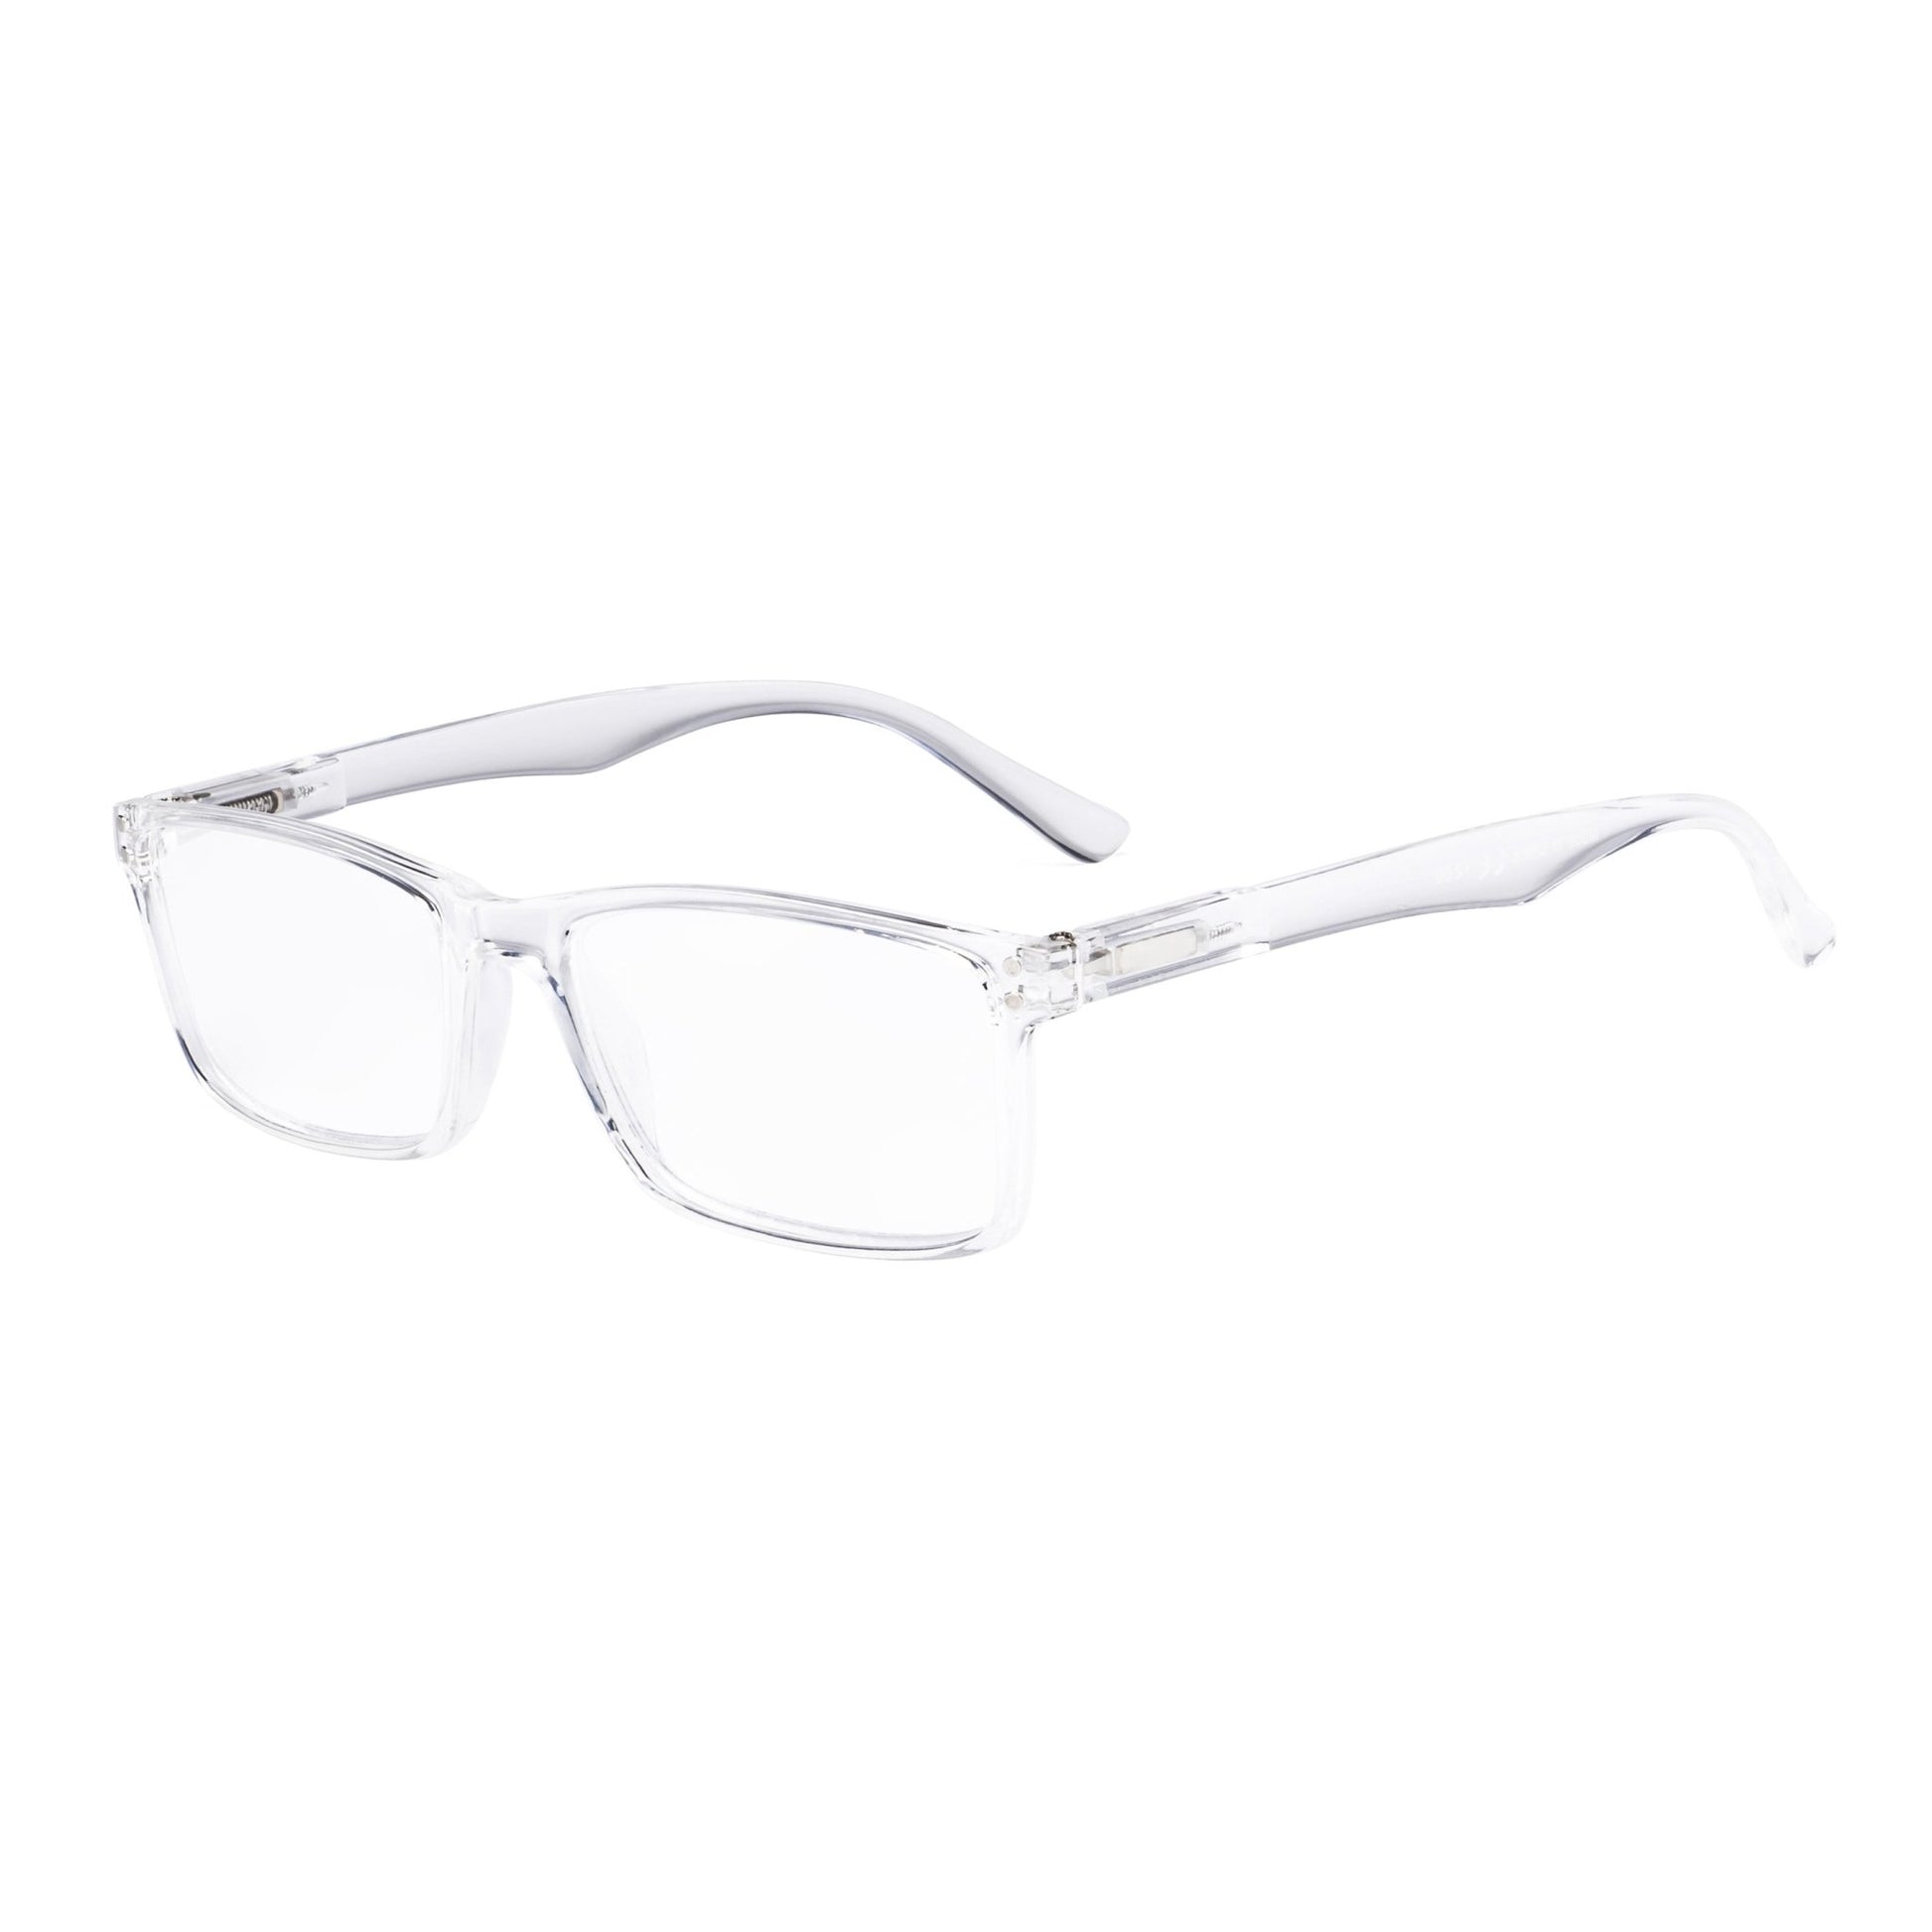 Vintage Stylish Reading Glasses Clear R802-A